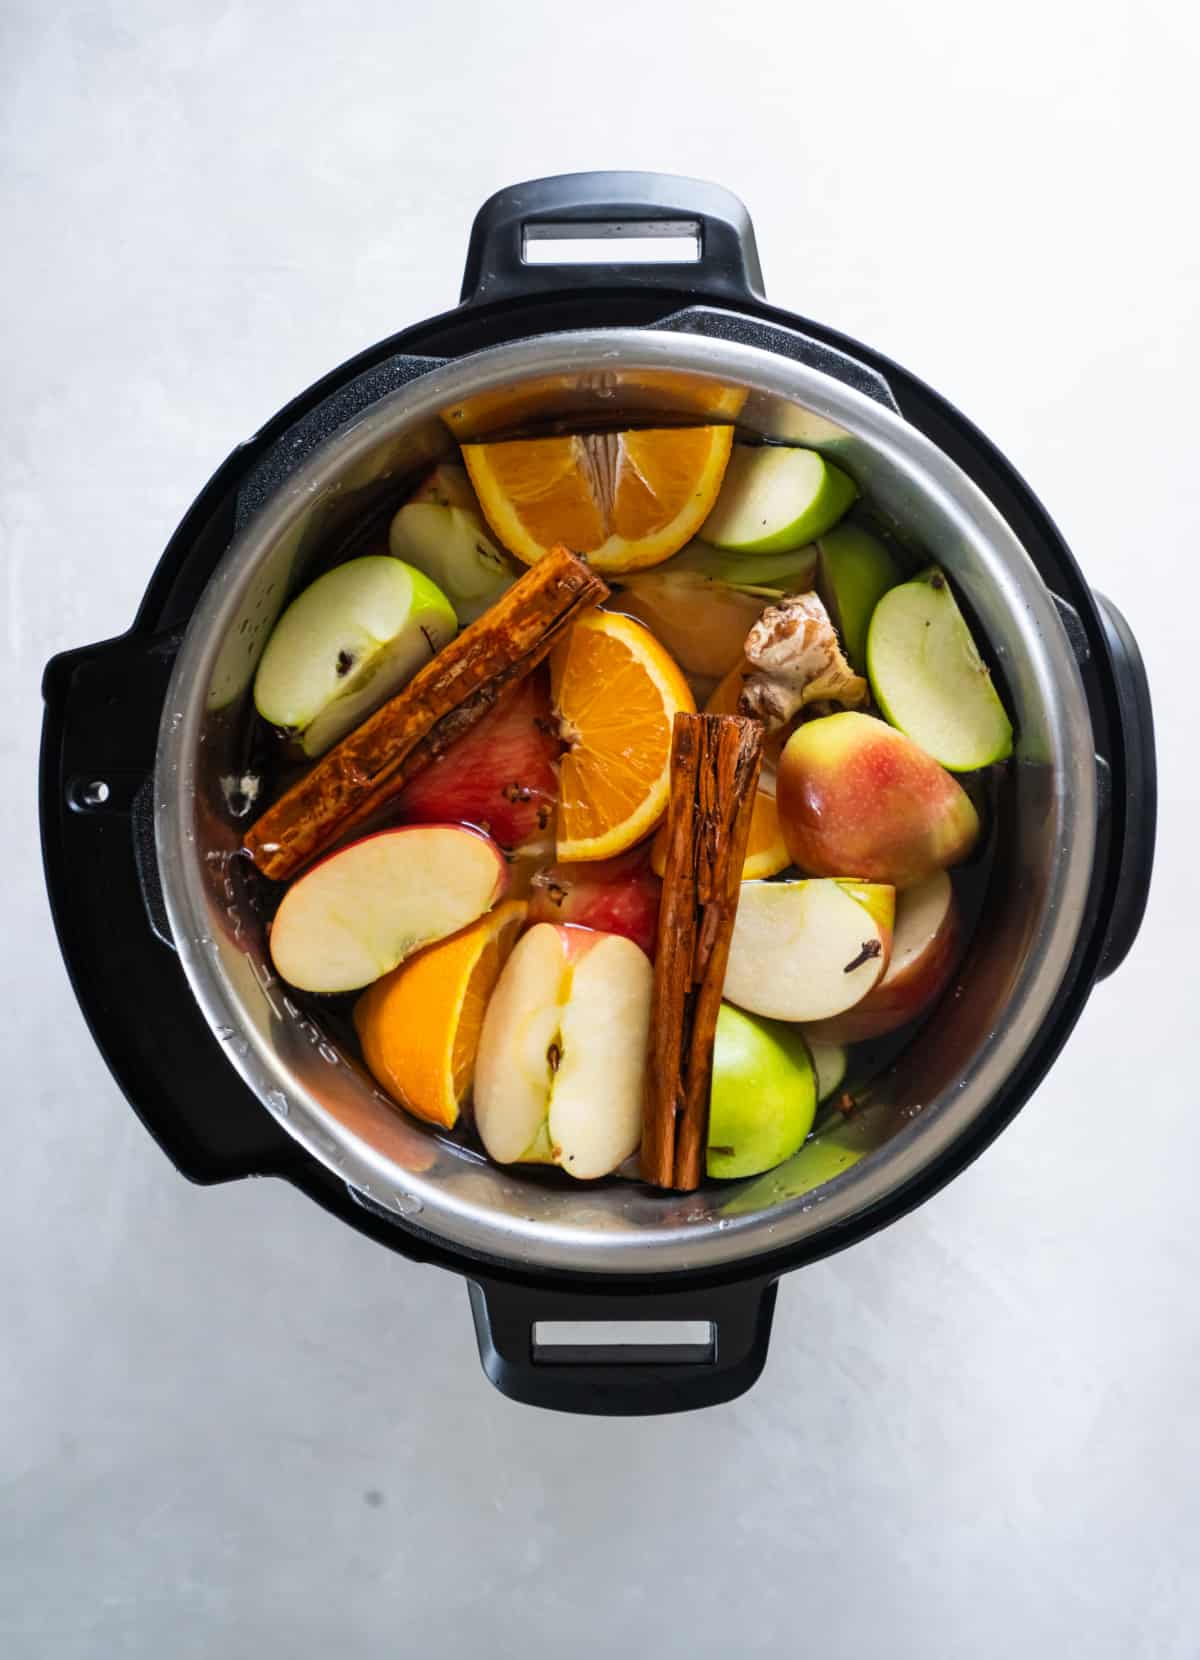 All of the ingredients for the apple cider in an instant pot before cooking.